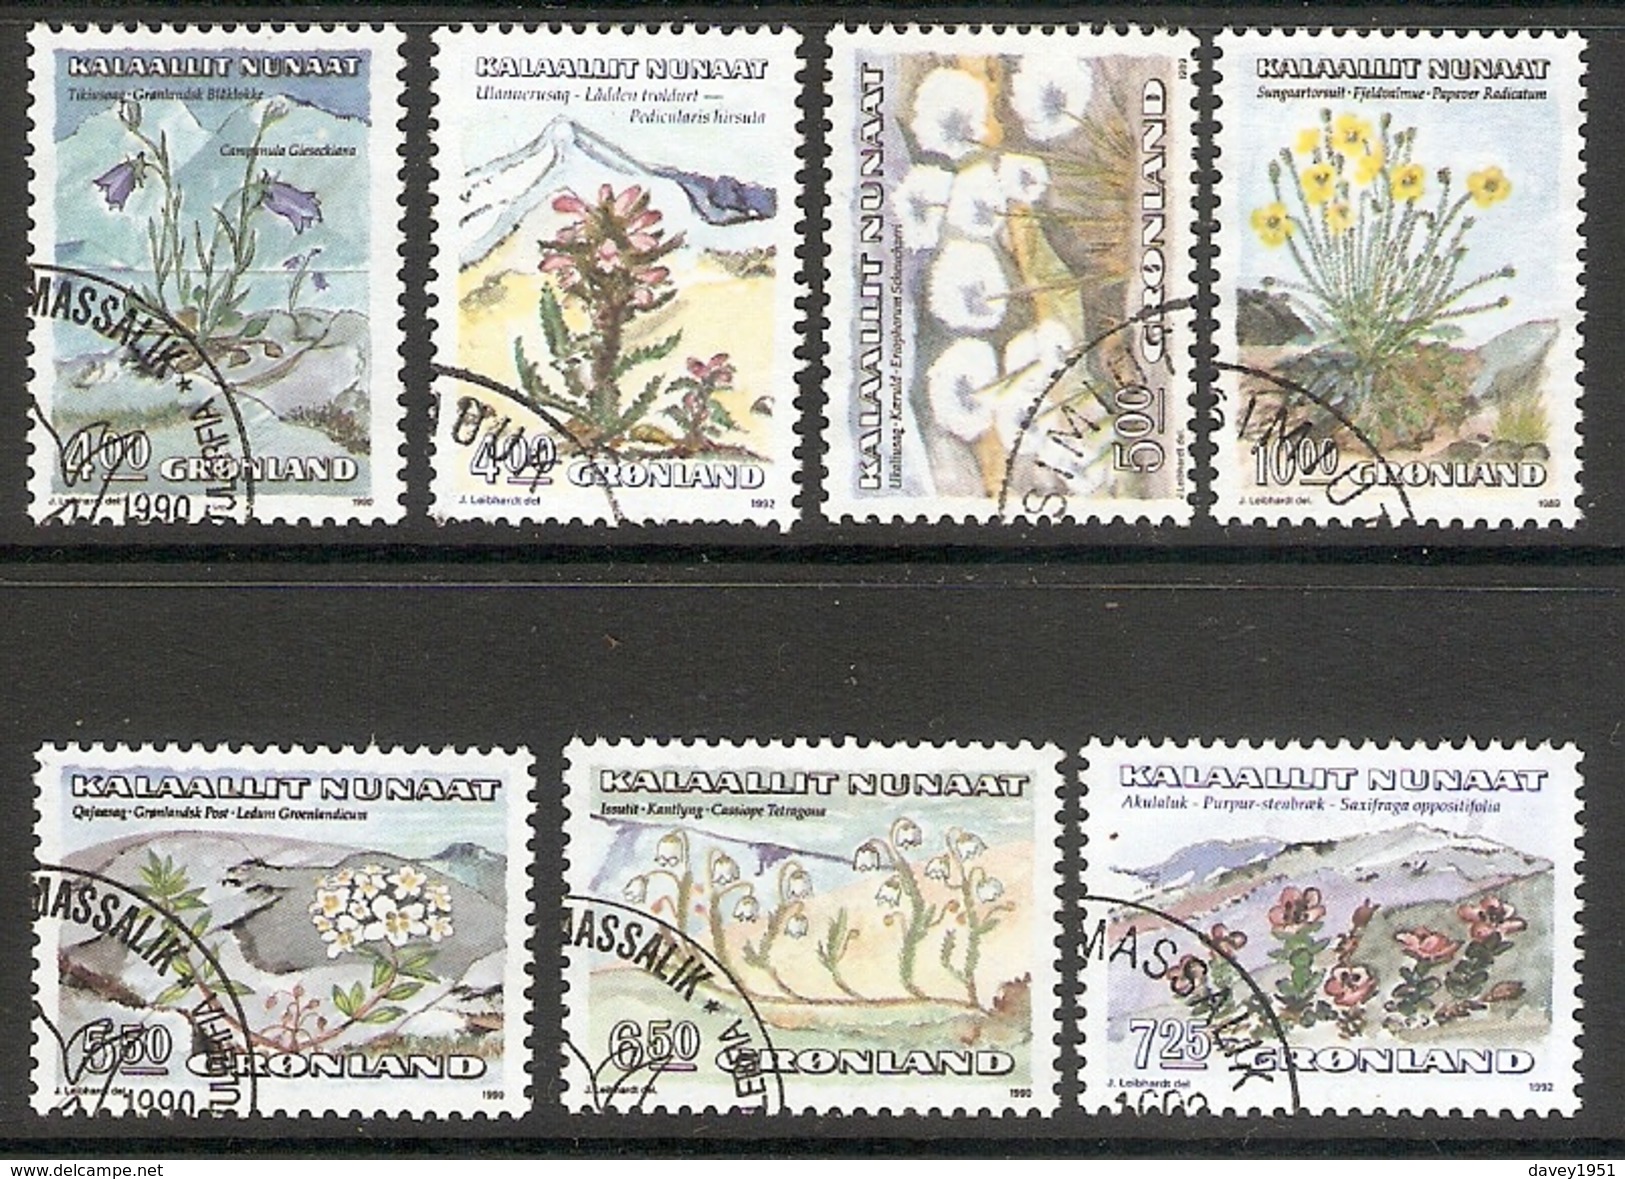 004051 Greenland 1990 Flowers Set FU - Used Stamps